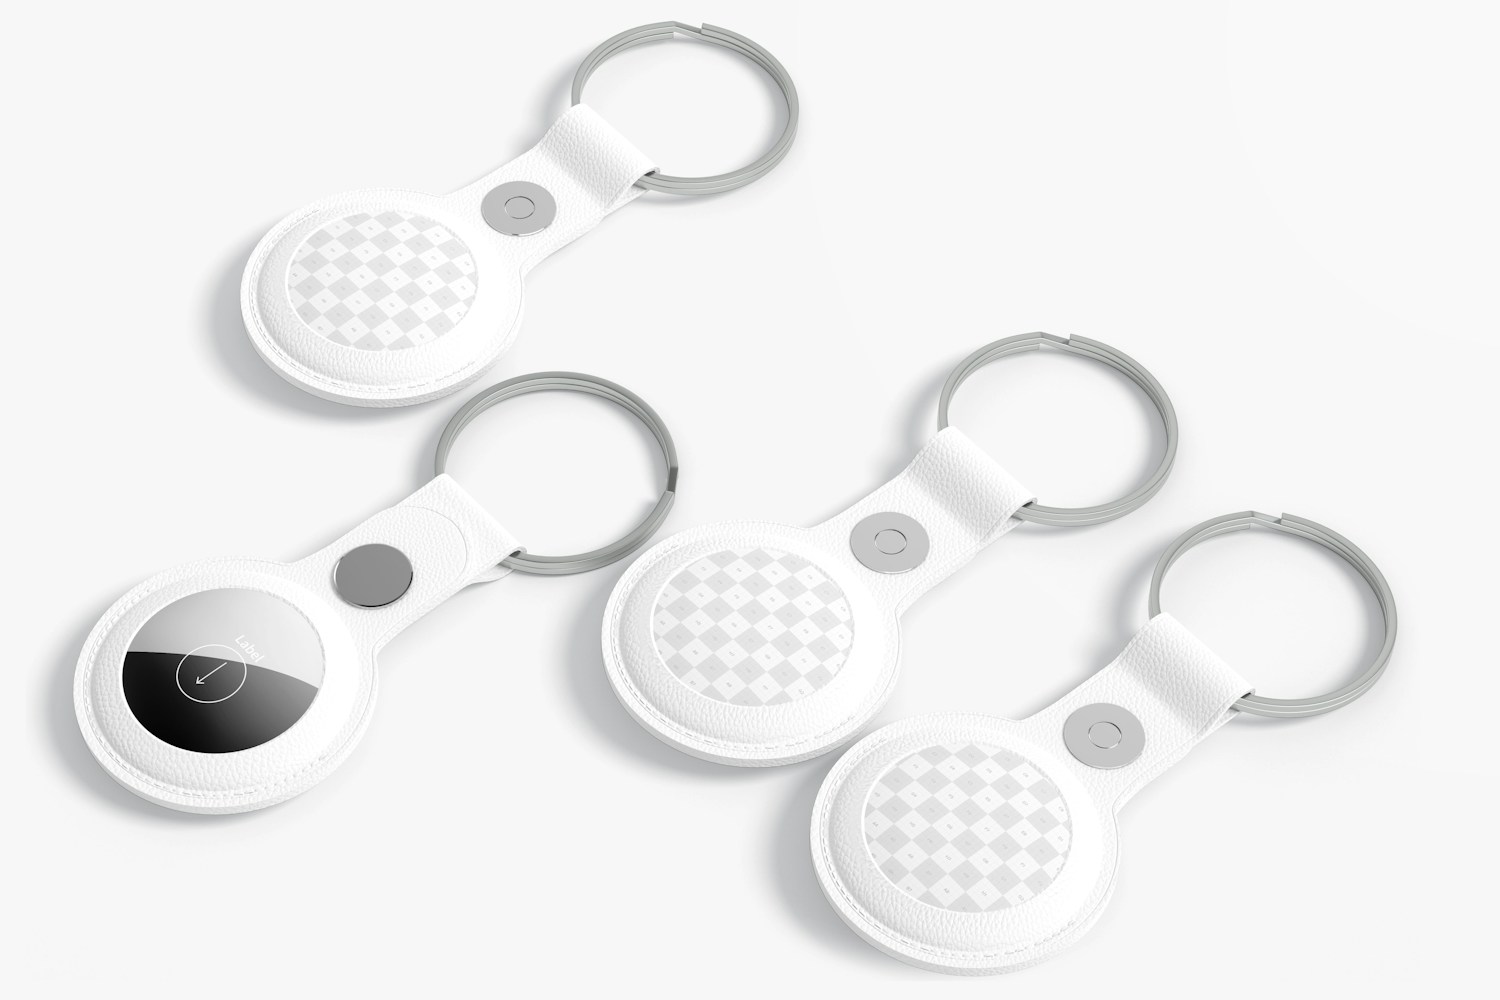 AirTags with Keychain Mockup, Perspective View